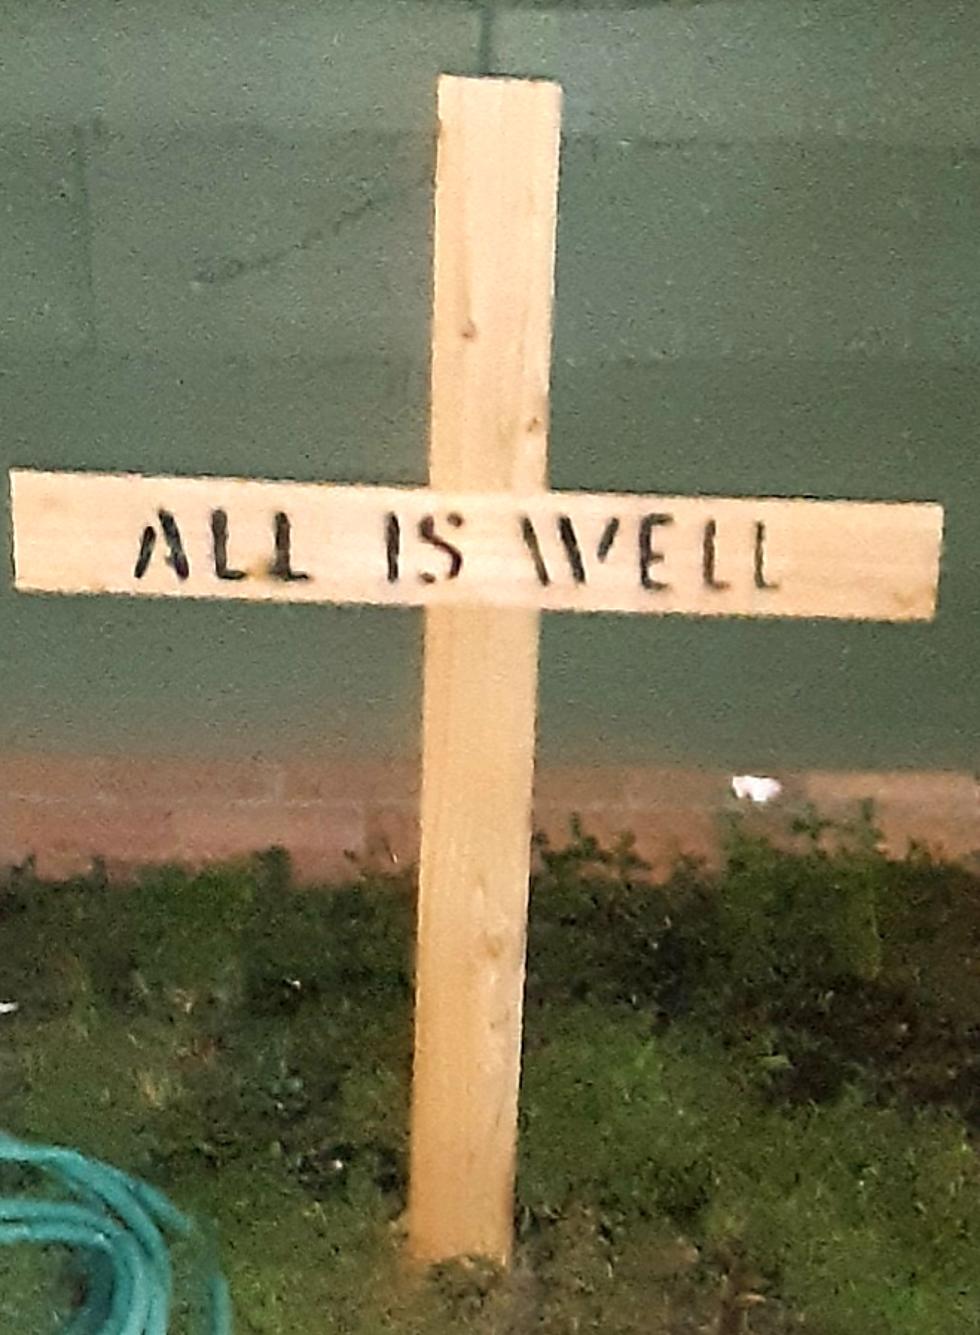 Local Salon Giving Away Free "All Is Well" Crosses